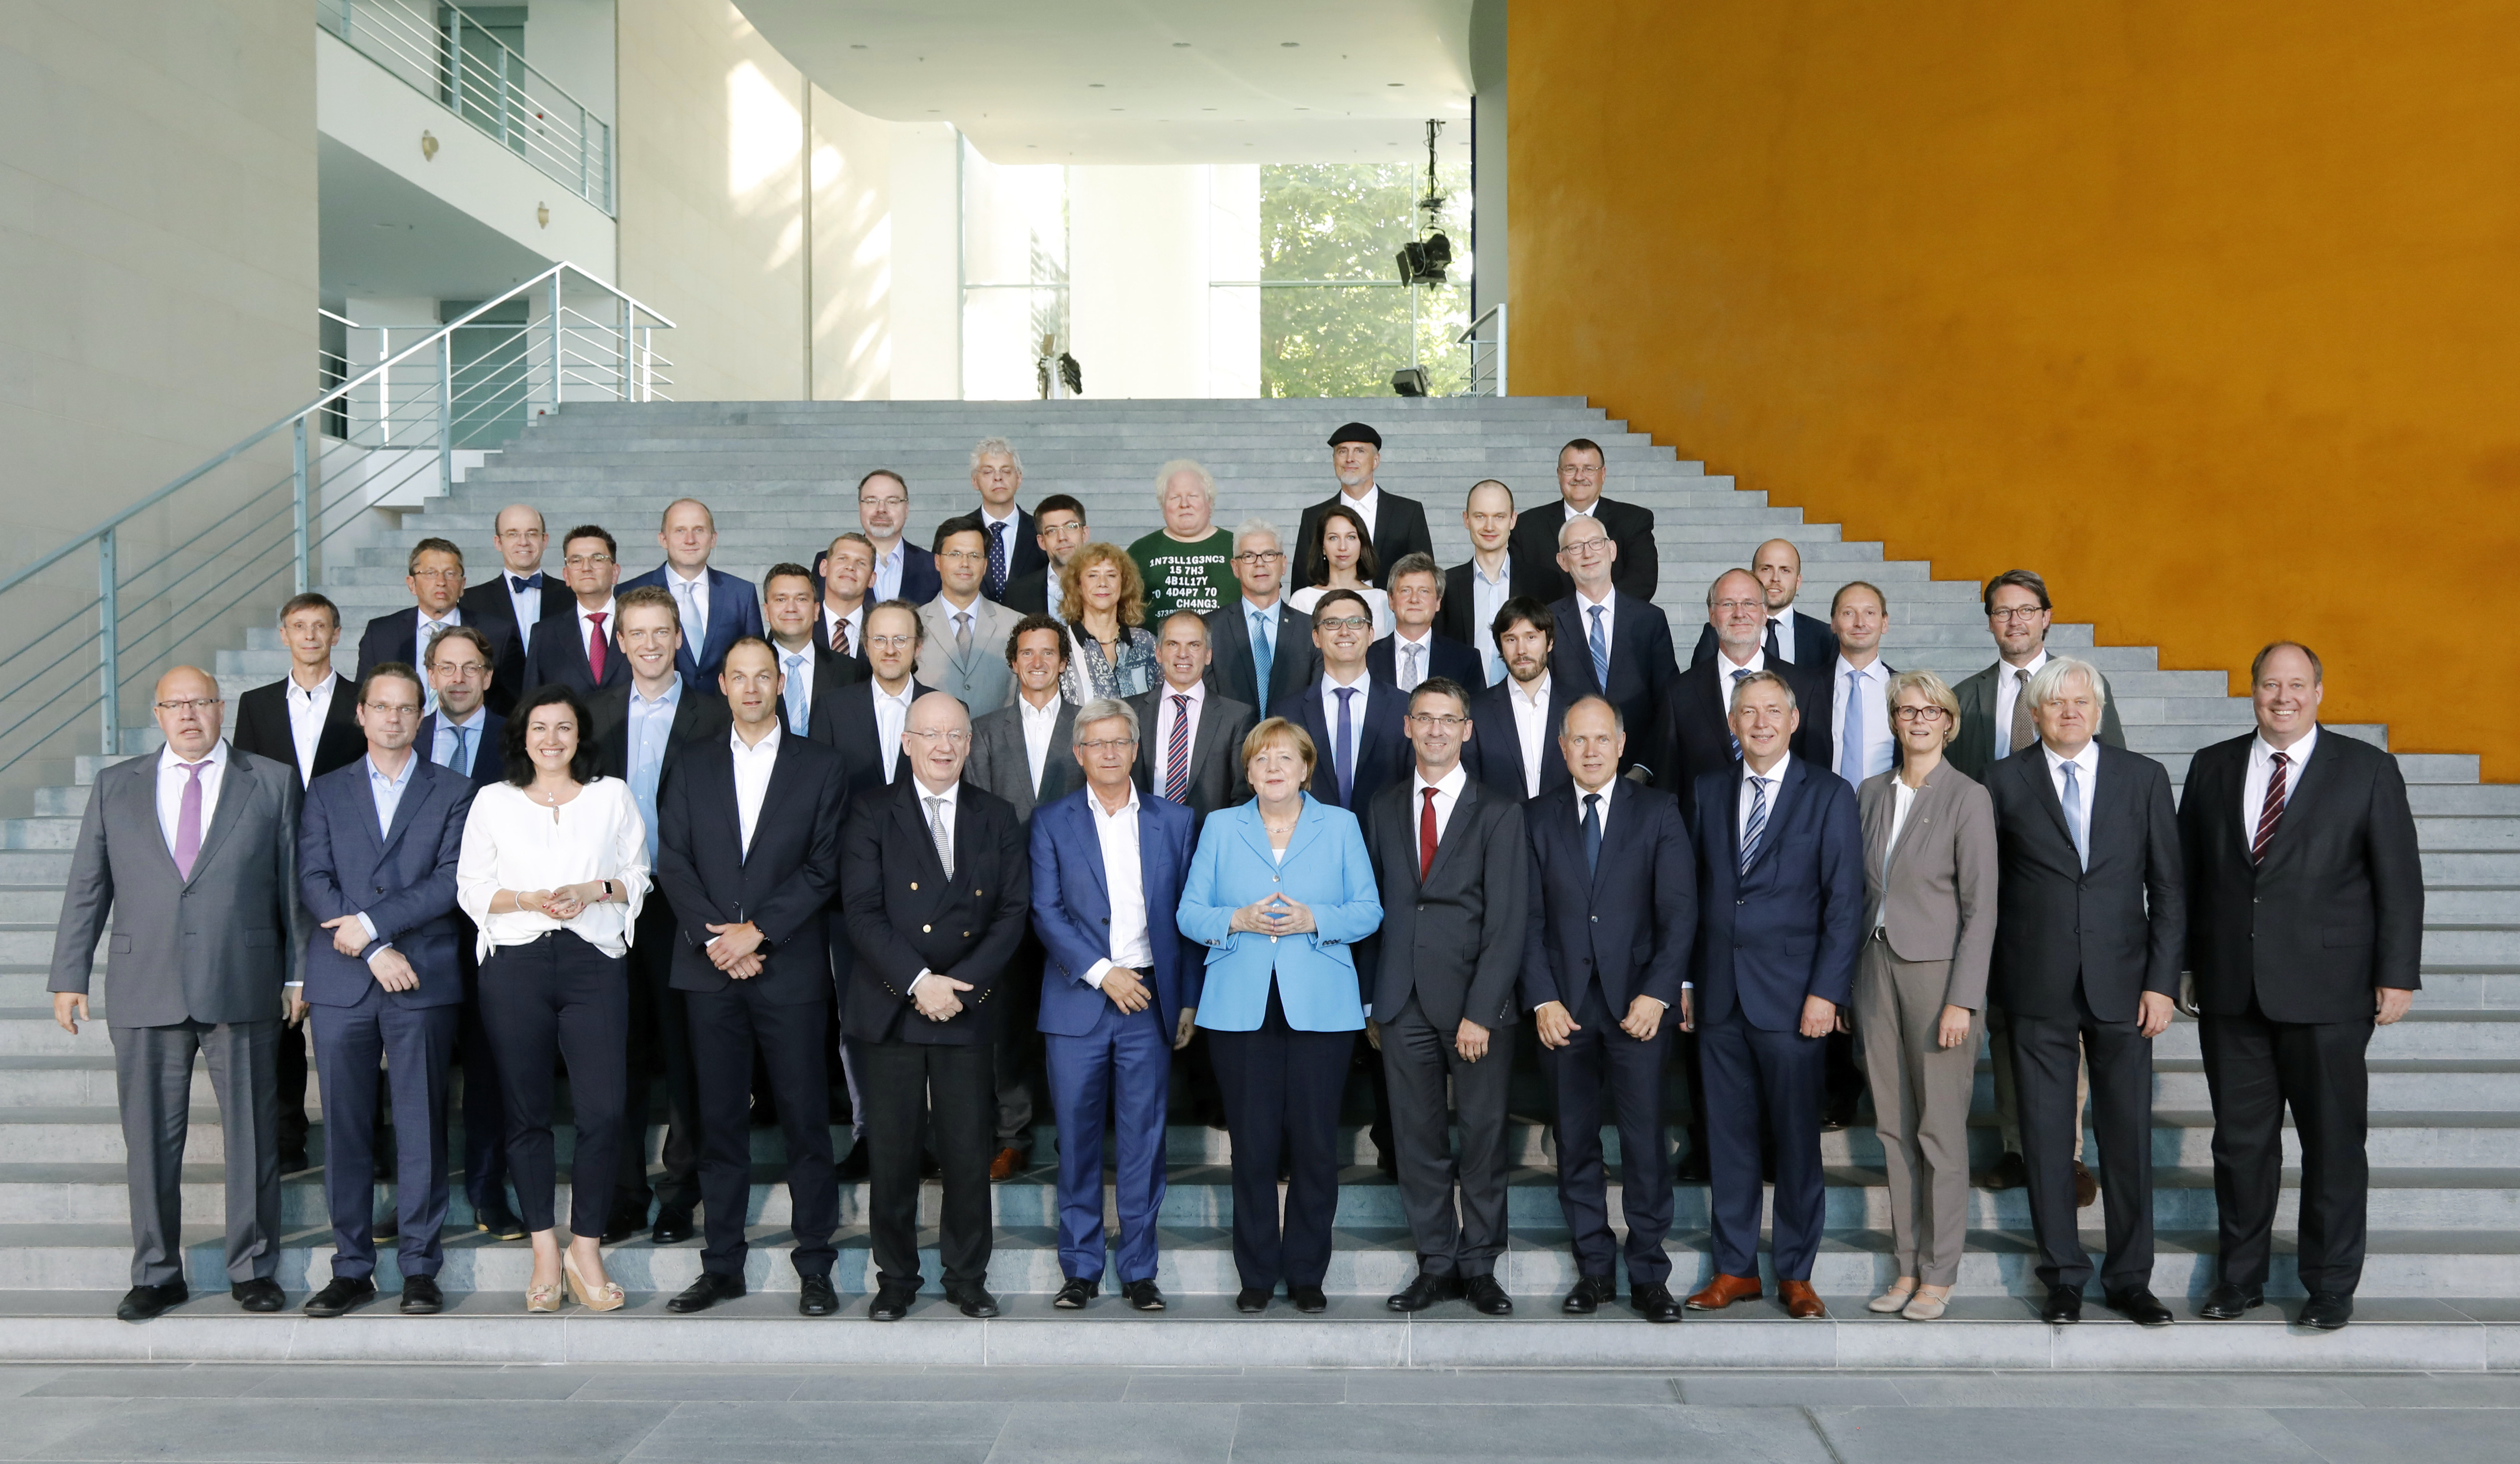 group photo with Chancellor Merkel